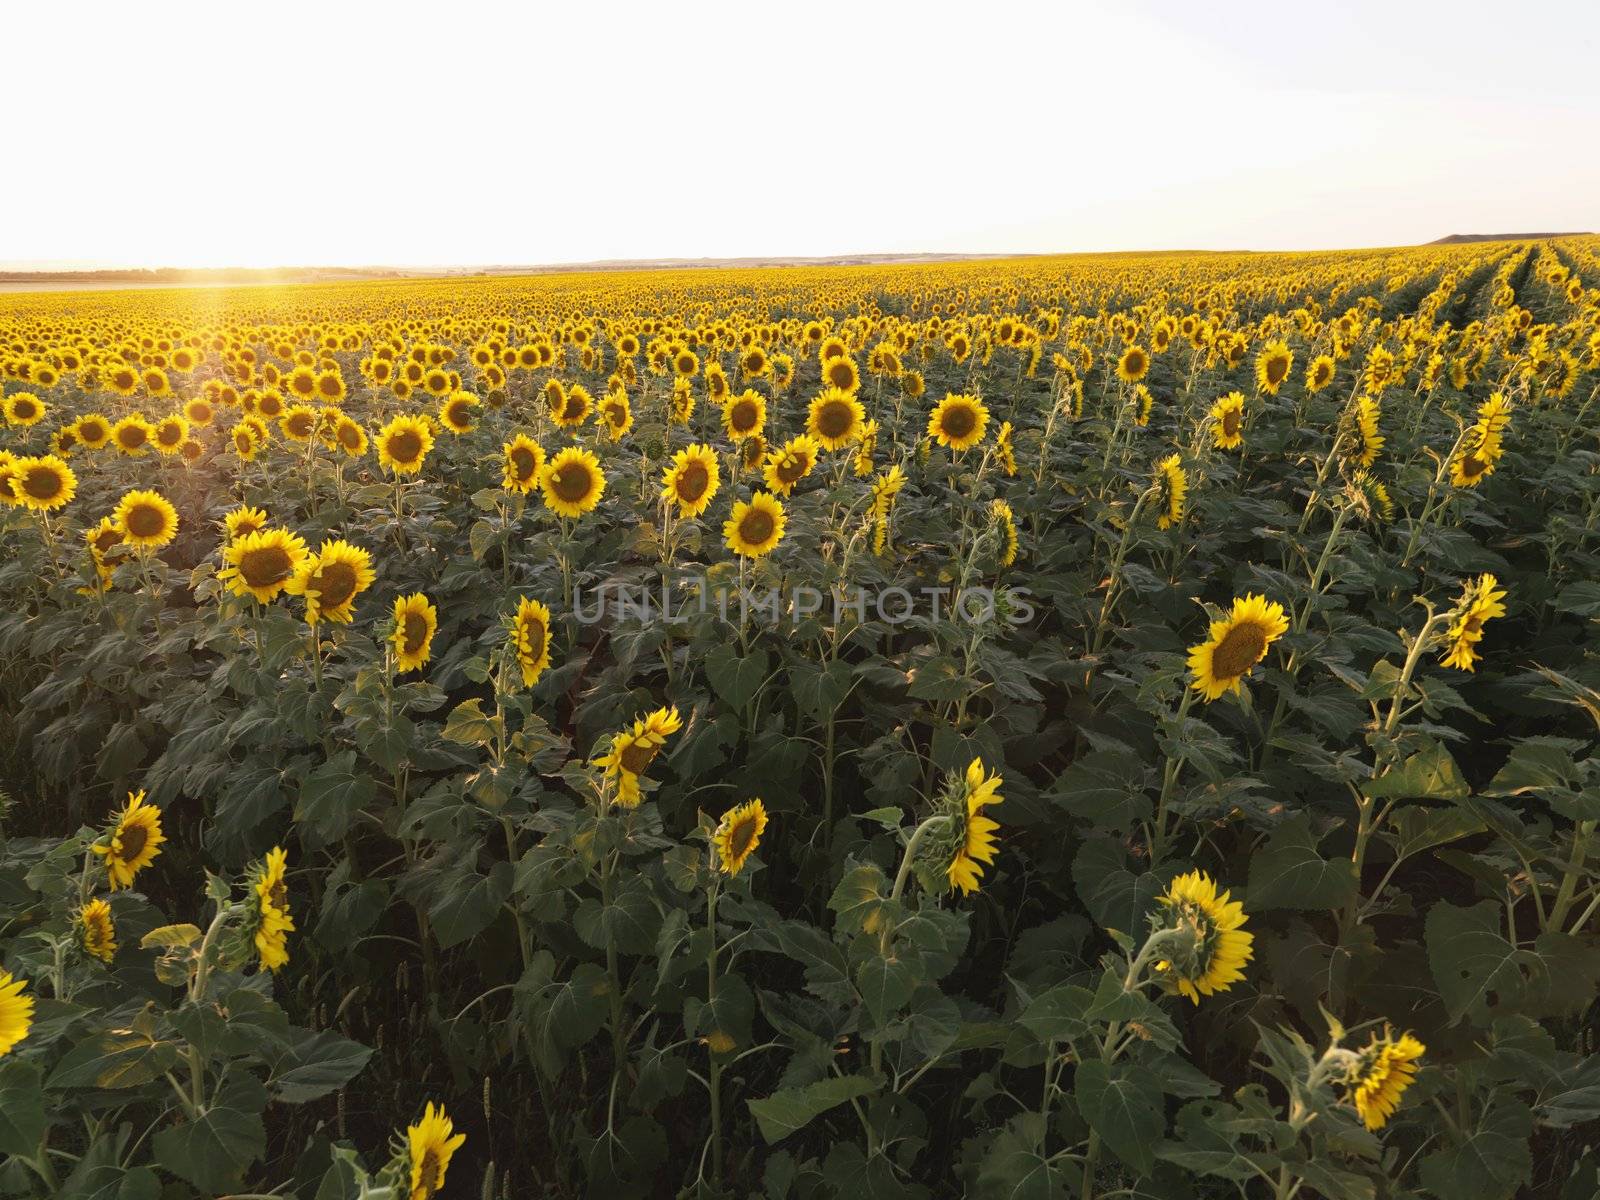 Field of sunflowers planted in rows.